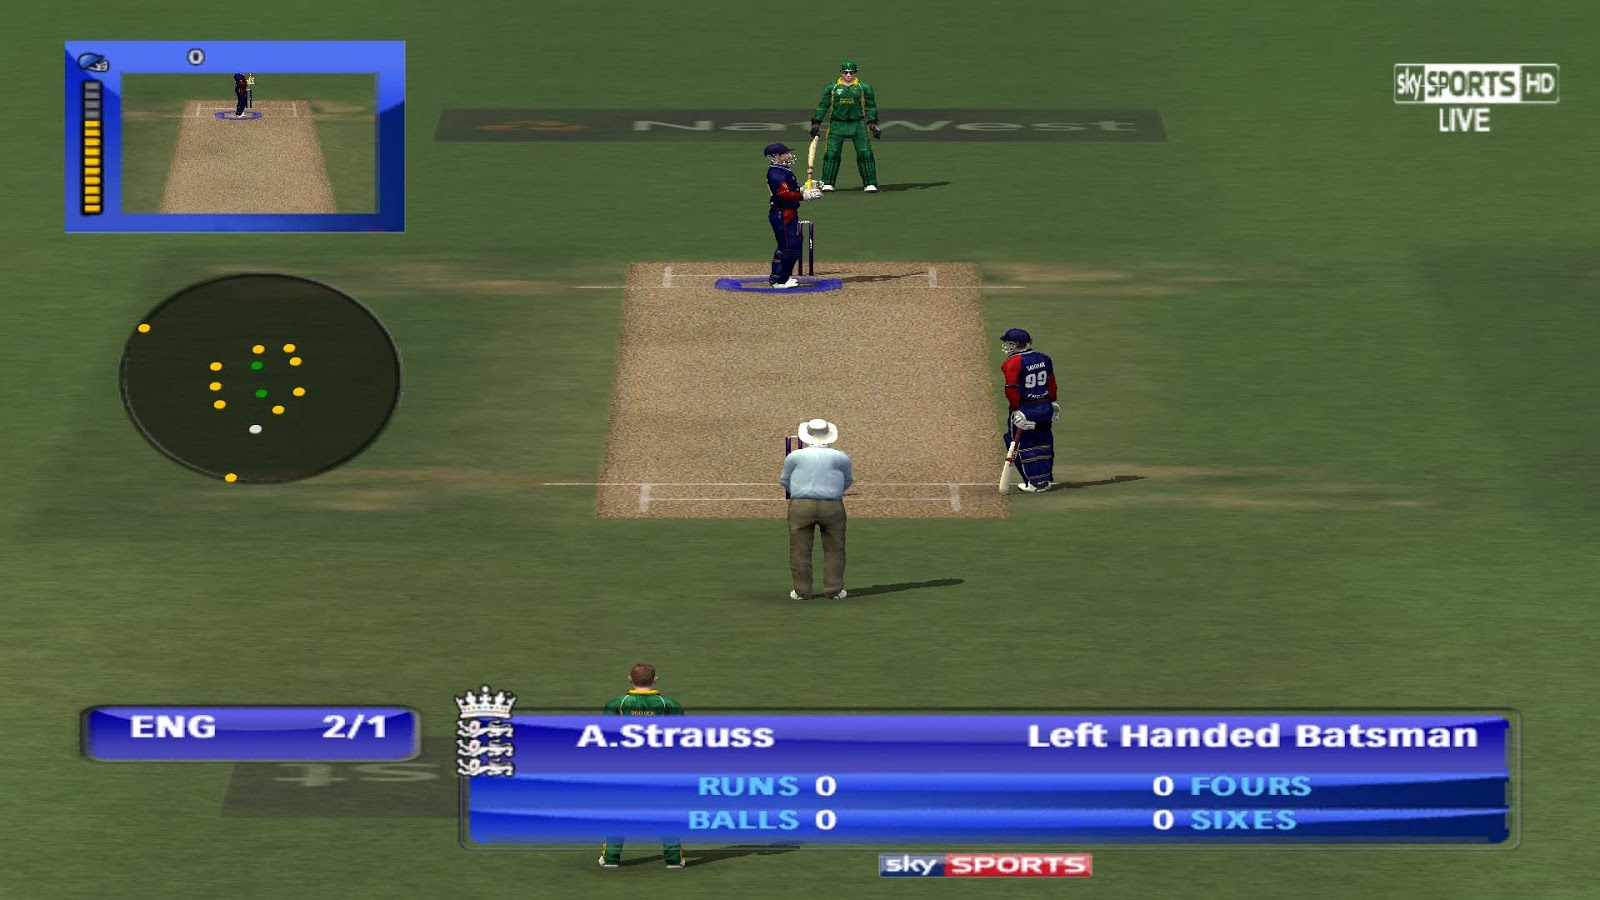 ea sports cricket 07 game free download for pc full version